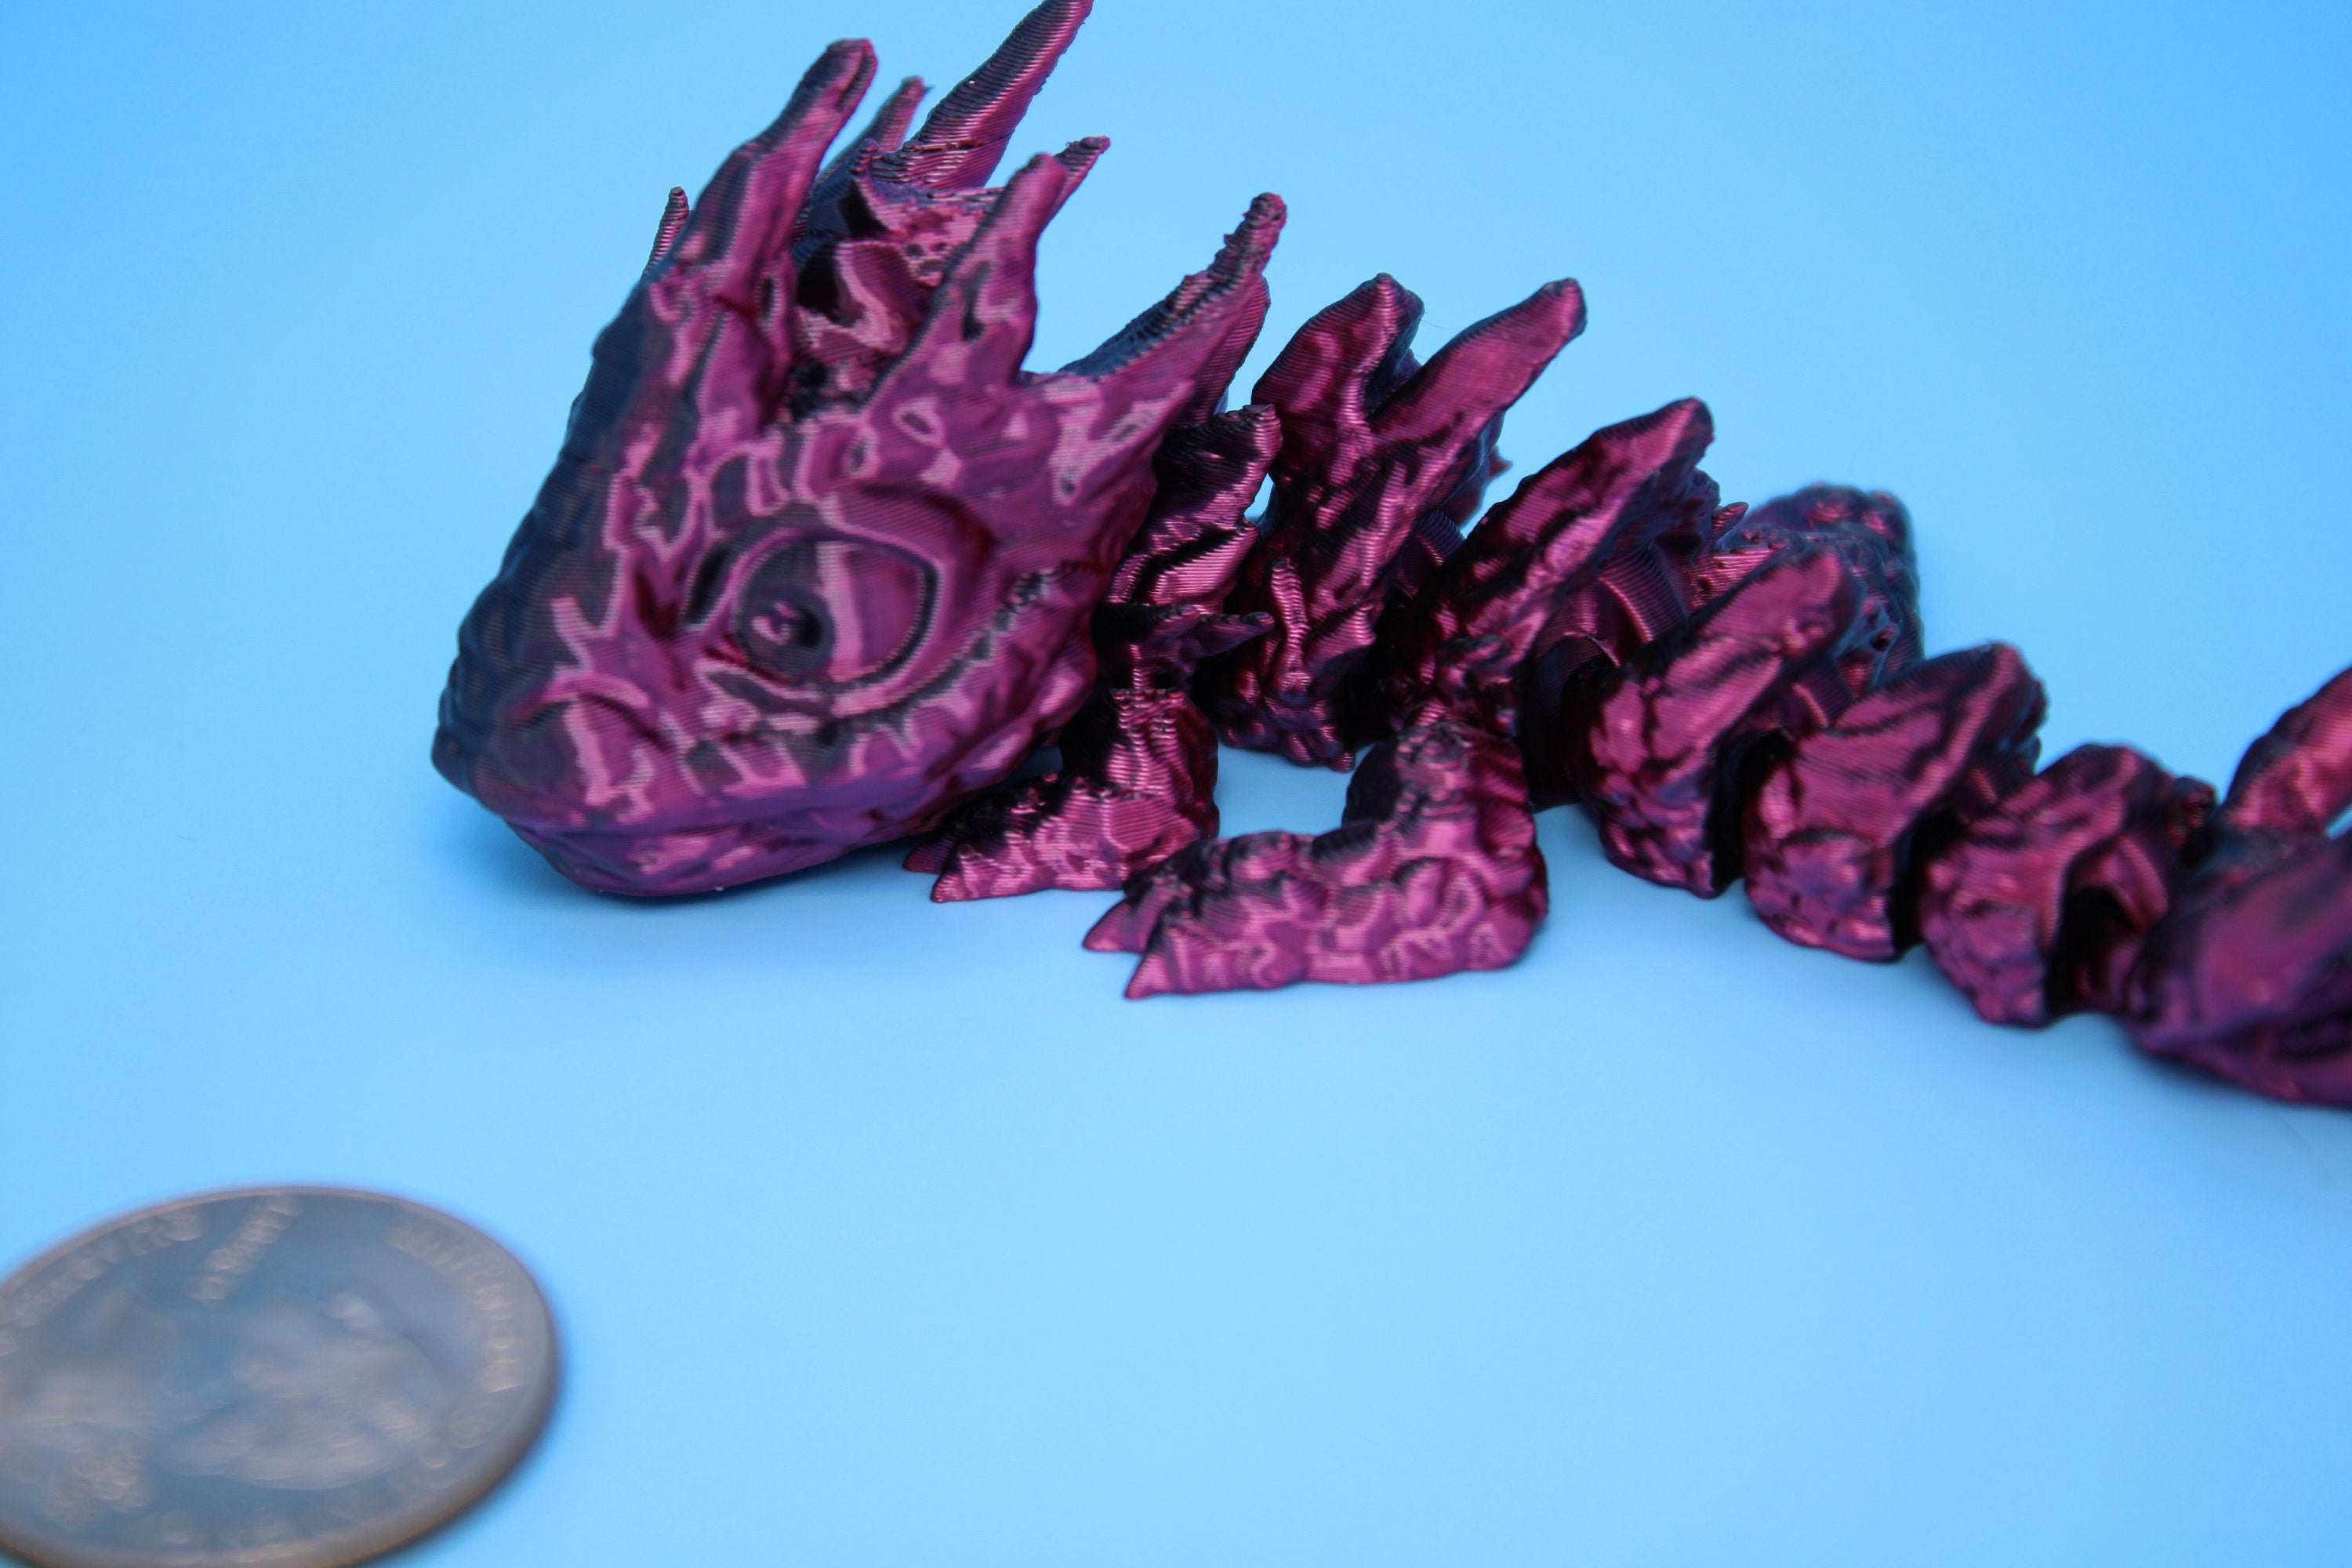 Stone Baby Dragon | 3D Printed | Red And Black Dragon | Great Fidget Toy | Desk Buddy | Sensory Toy